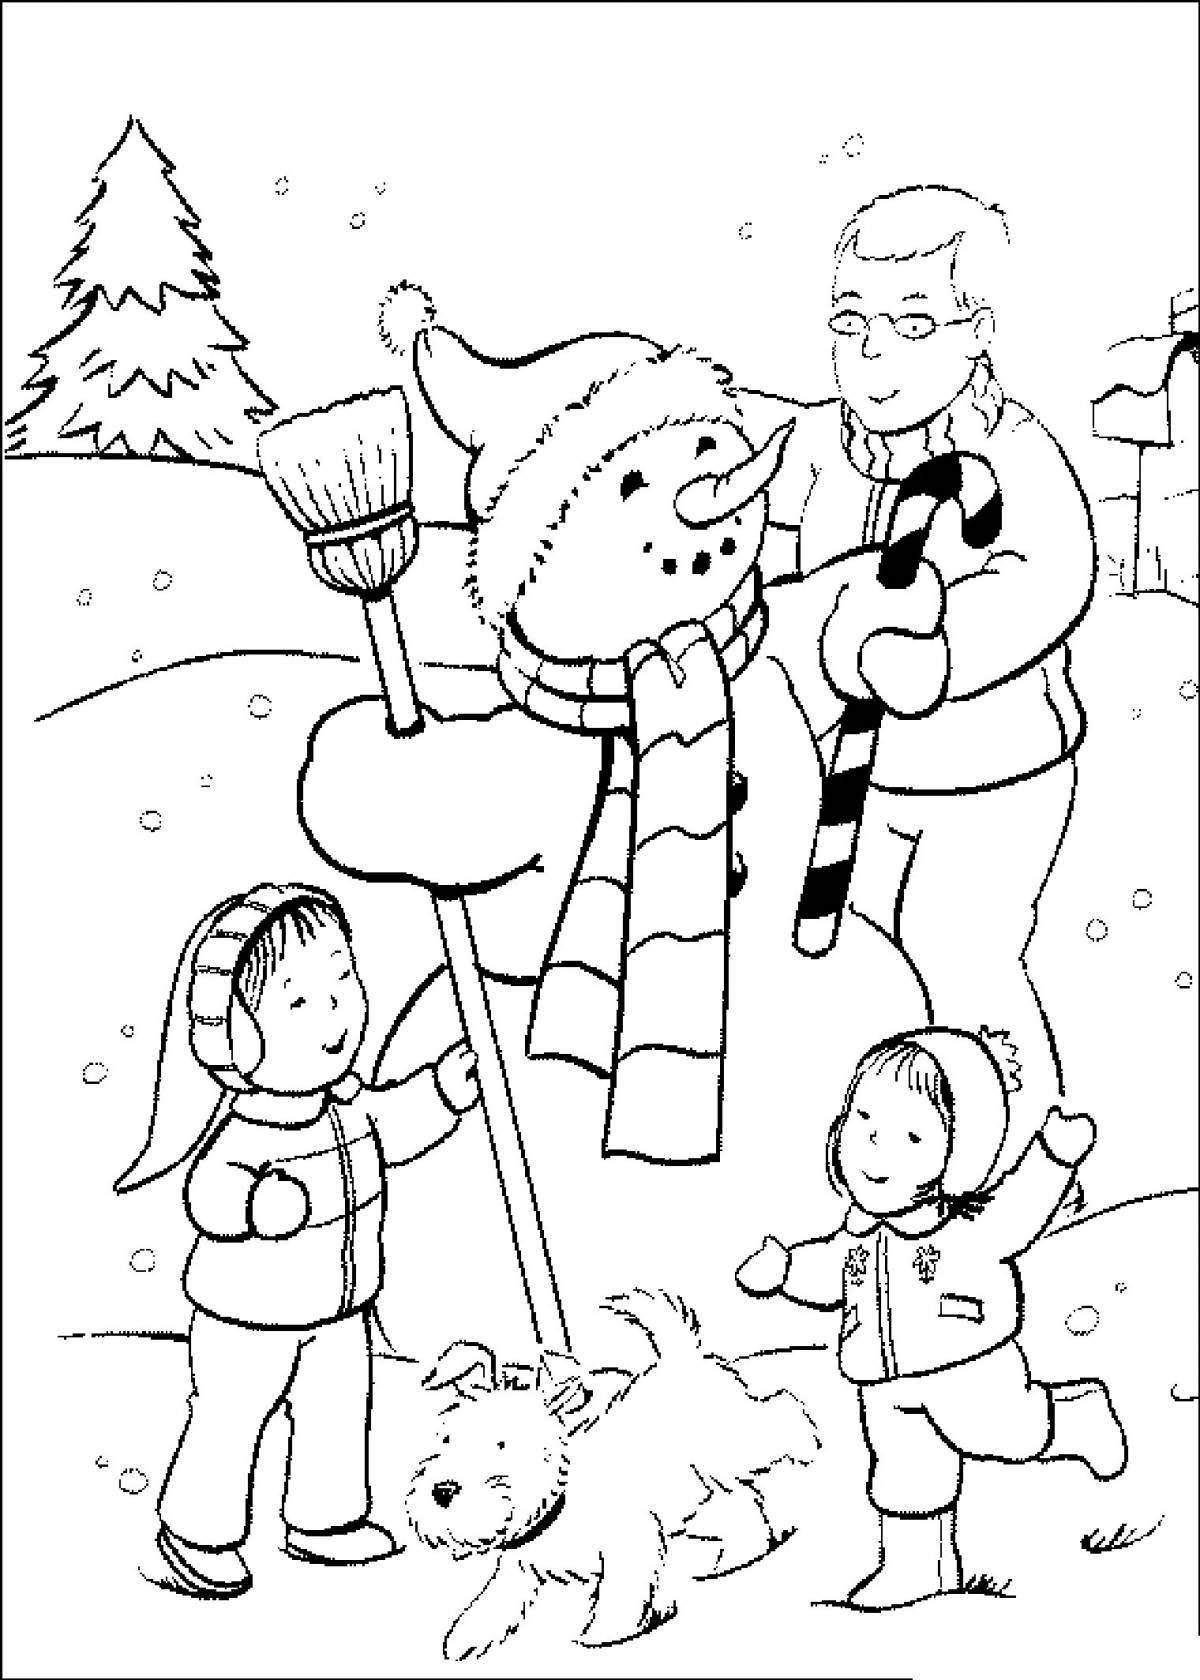 A fascinating Christmas family coloring book